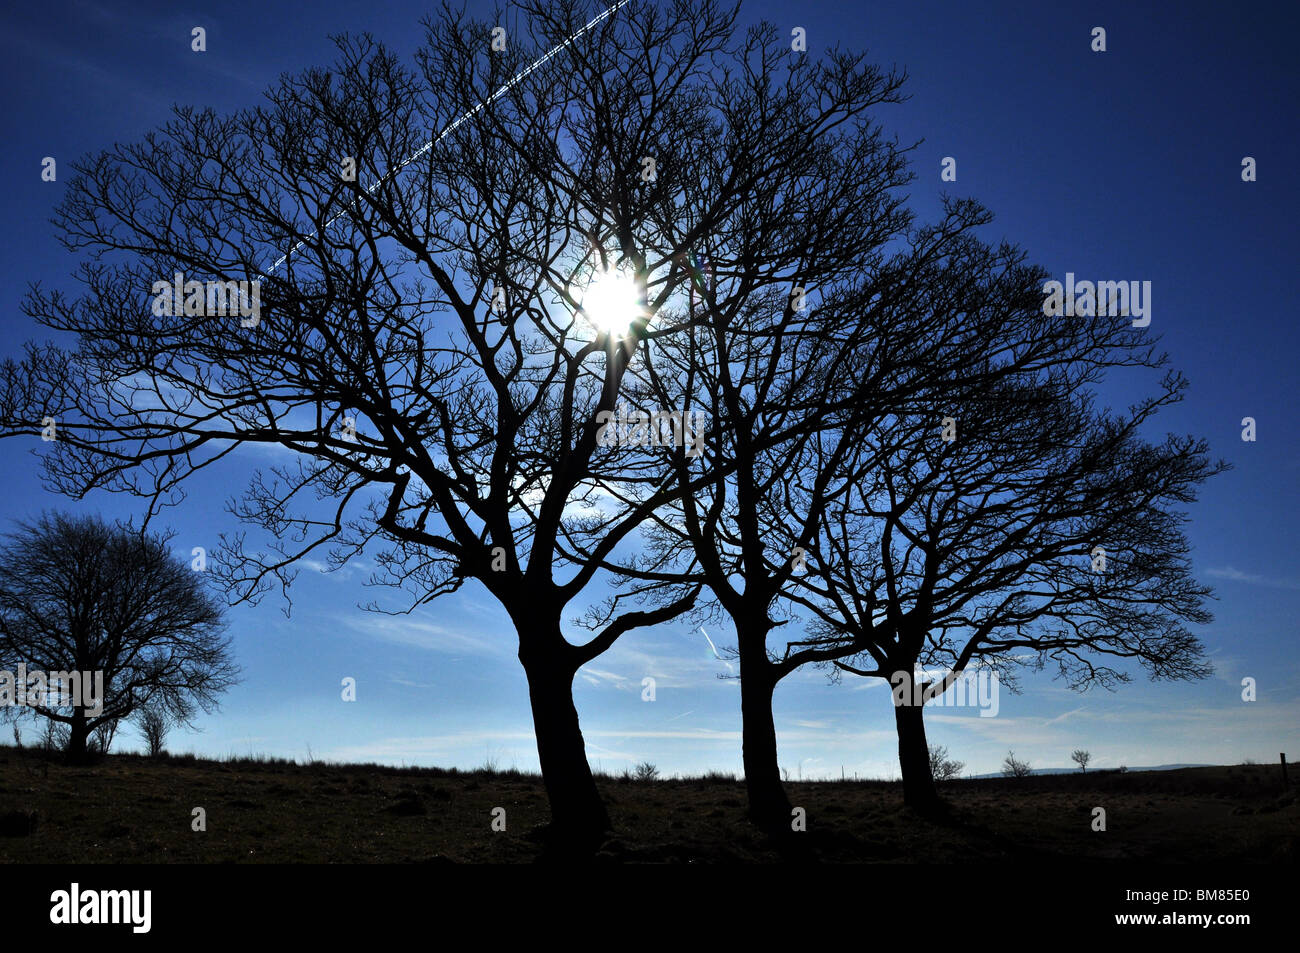 Three trees silhouetted by the sun in a landscape with plane jet streams also in the background. Stock Photo